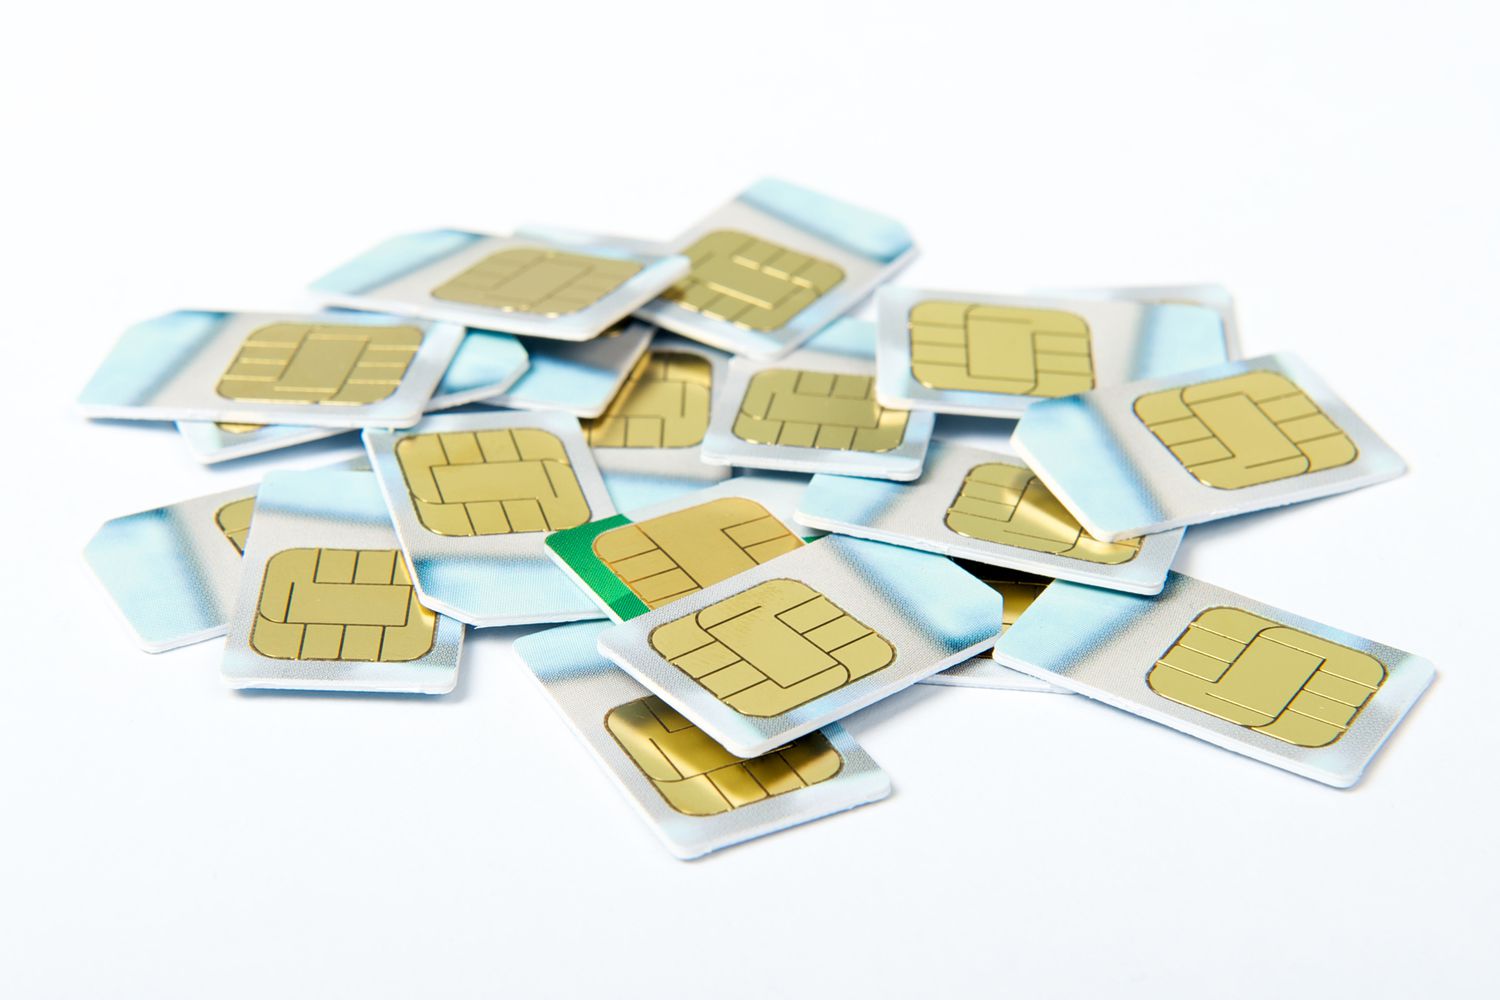 inserting-sim-card-in-iphone-8-a-step-by-step-guide